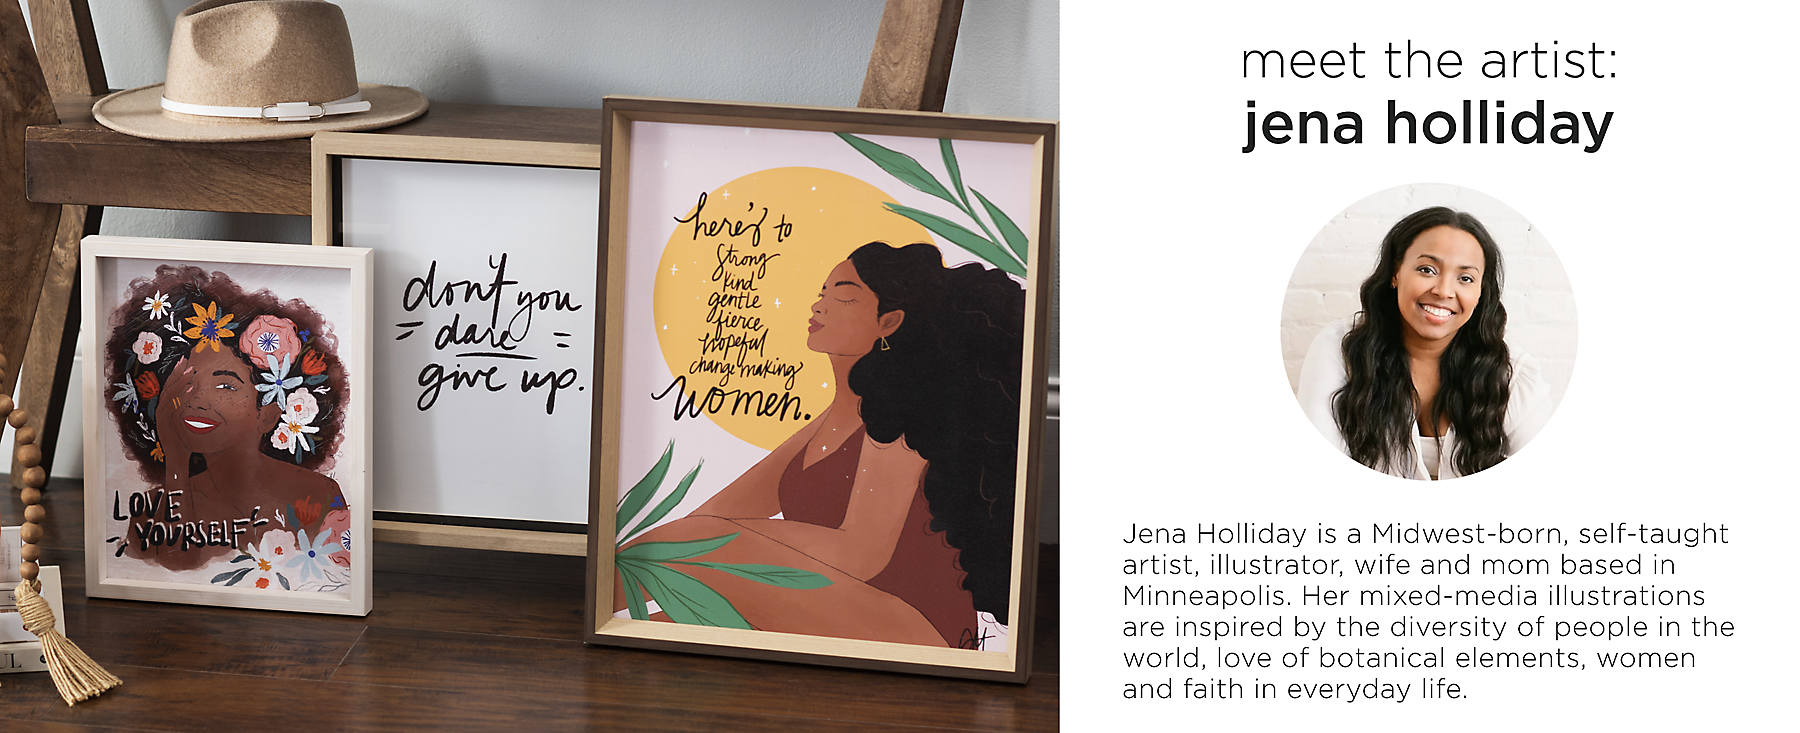 Meet the artist: Jena Holliday is a Midwest-born, self-taught artist, illustrator, wife and mom based in Minneapolis. Her mixed-media illustrations are inspired by the diversity of people in the world, love of botanical elements, women and faith in everyday life.